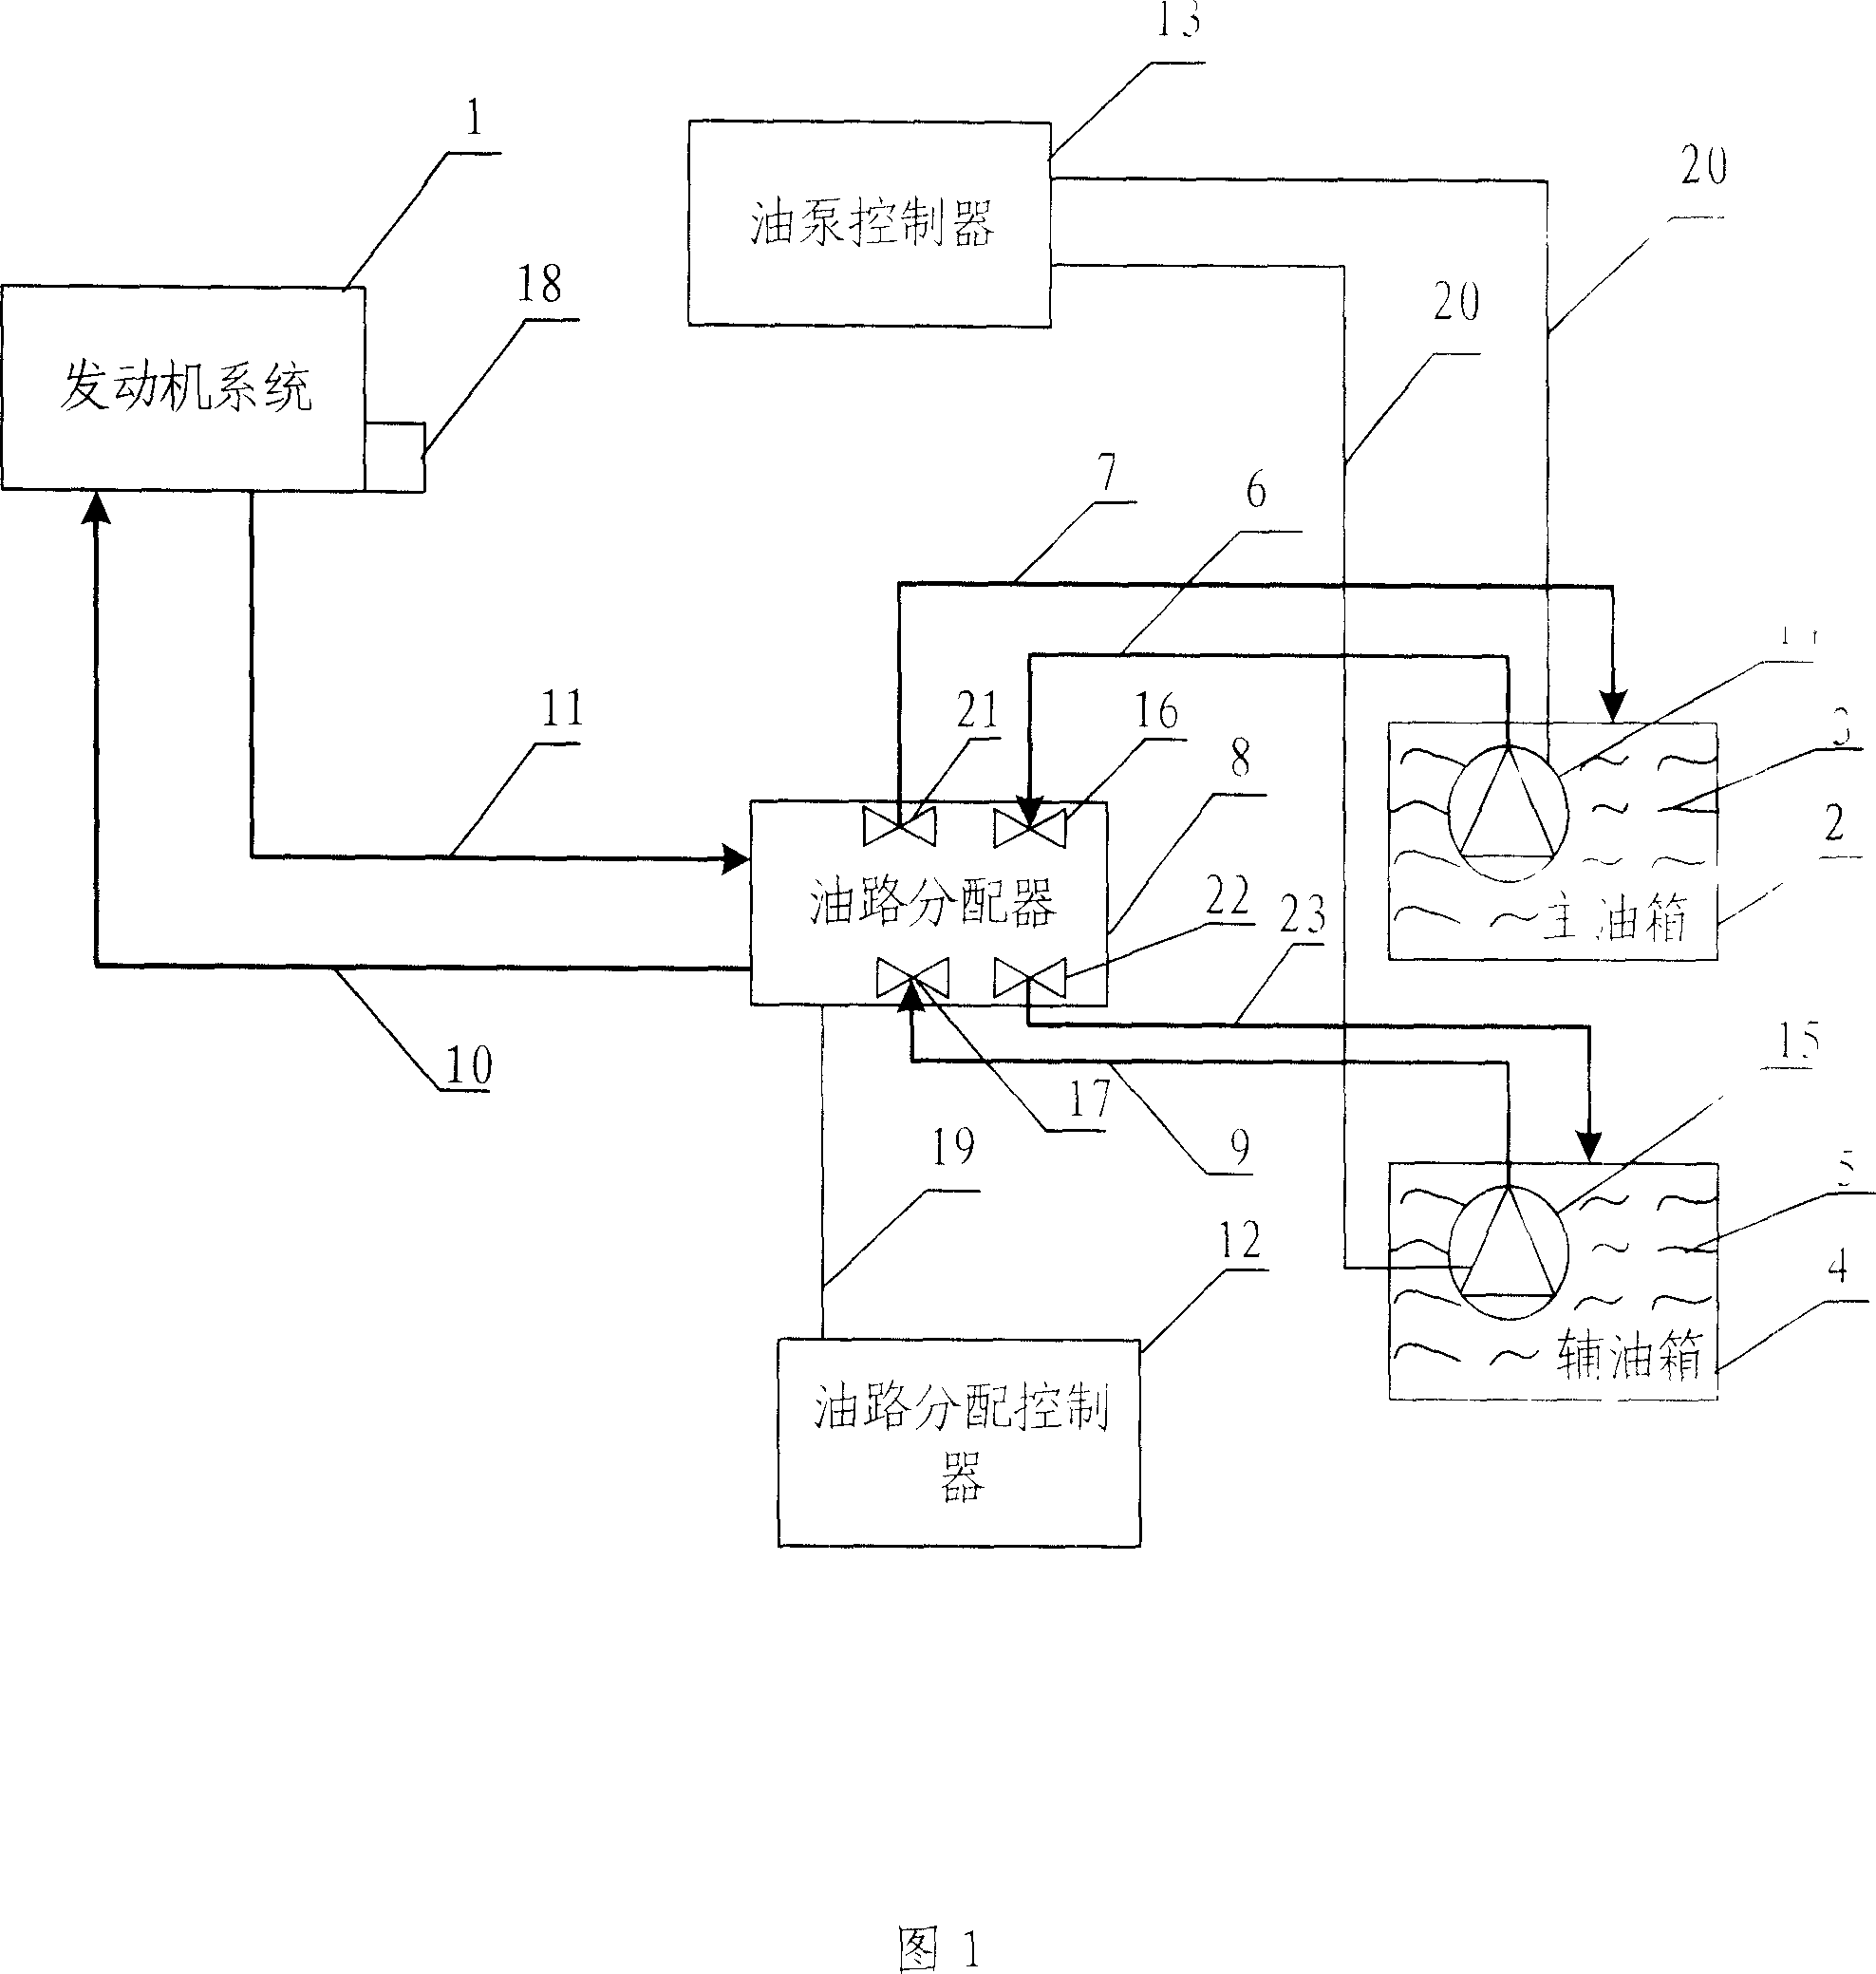 Assistant system used in flexible fuel combustion or fuel combustion under low temperature condition